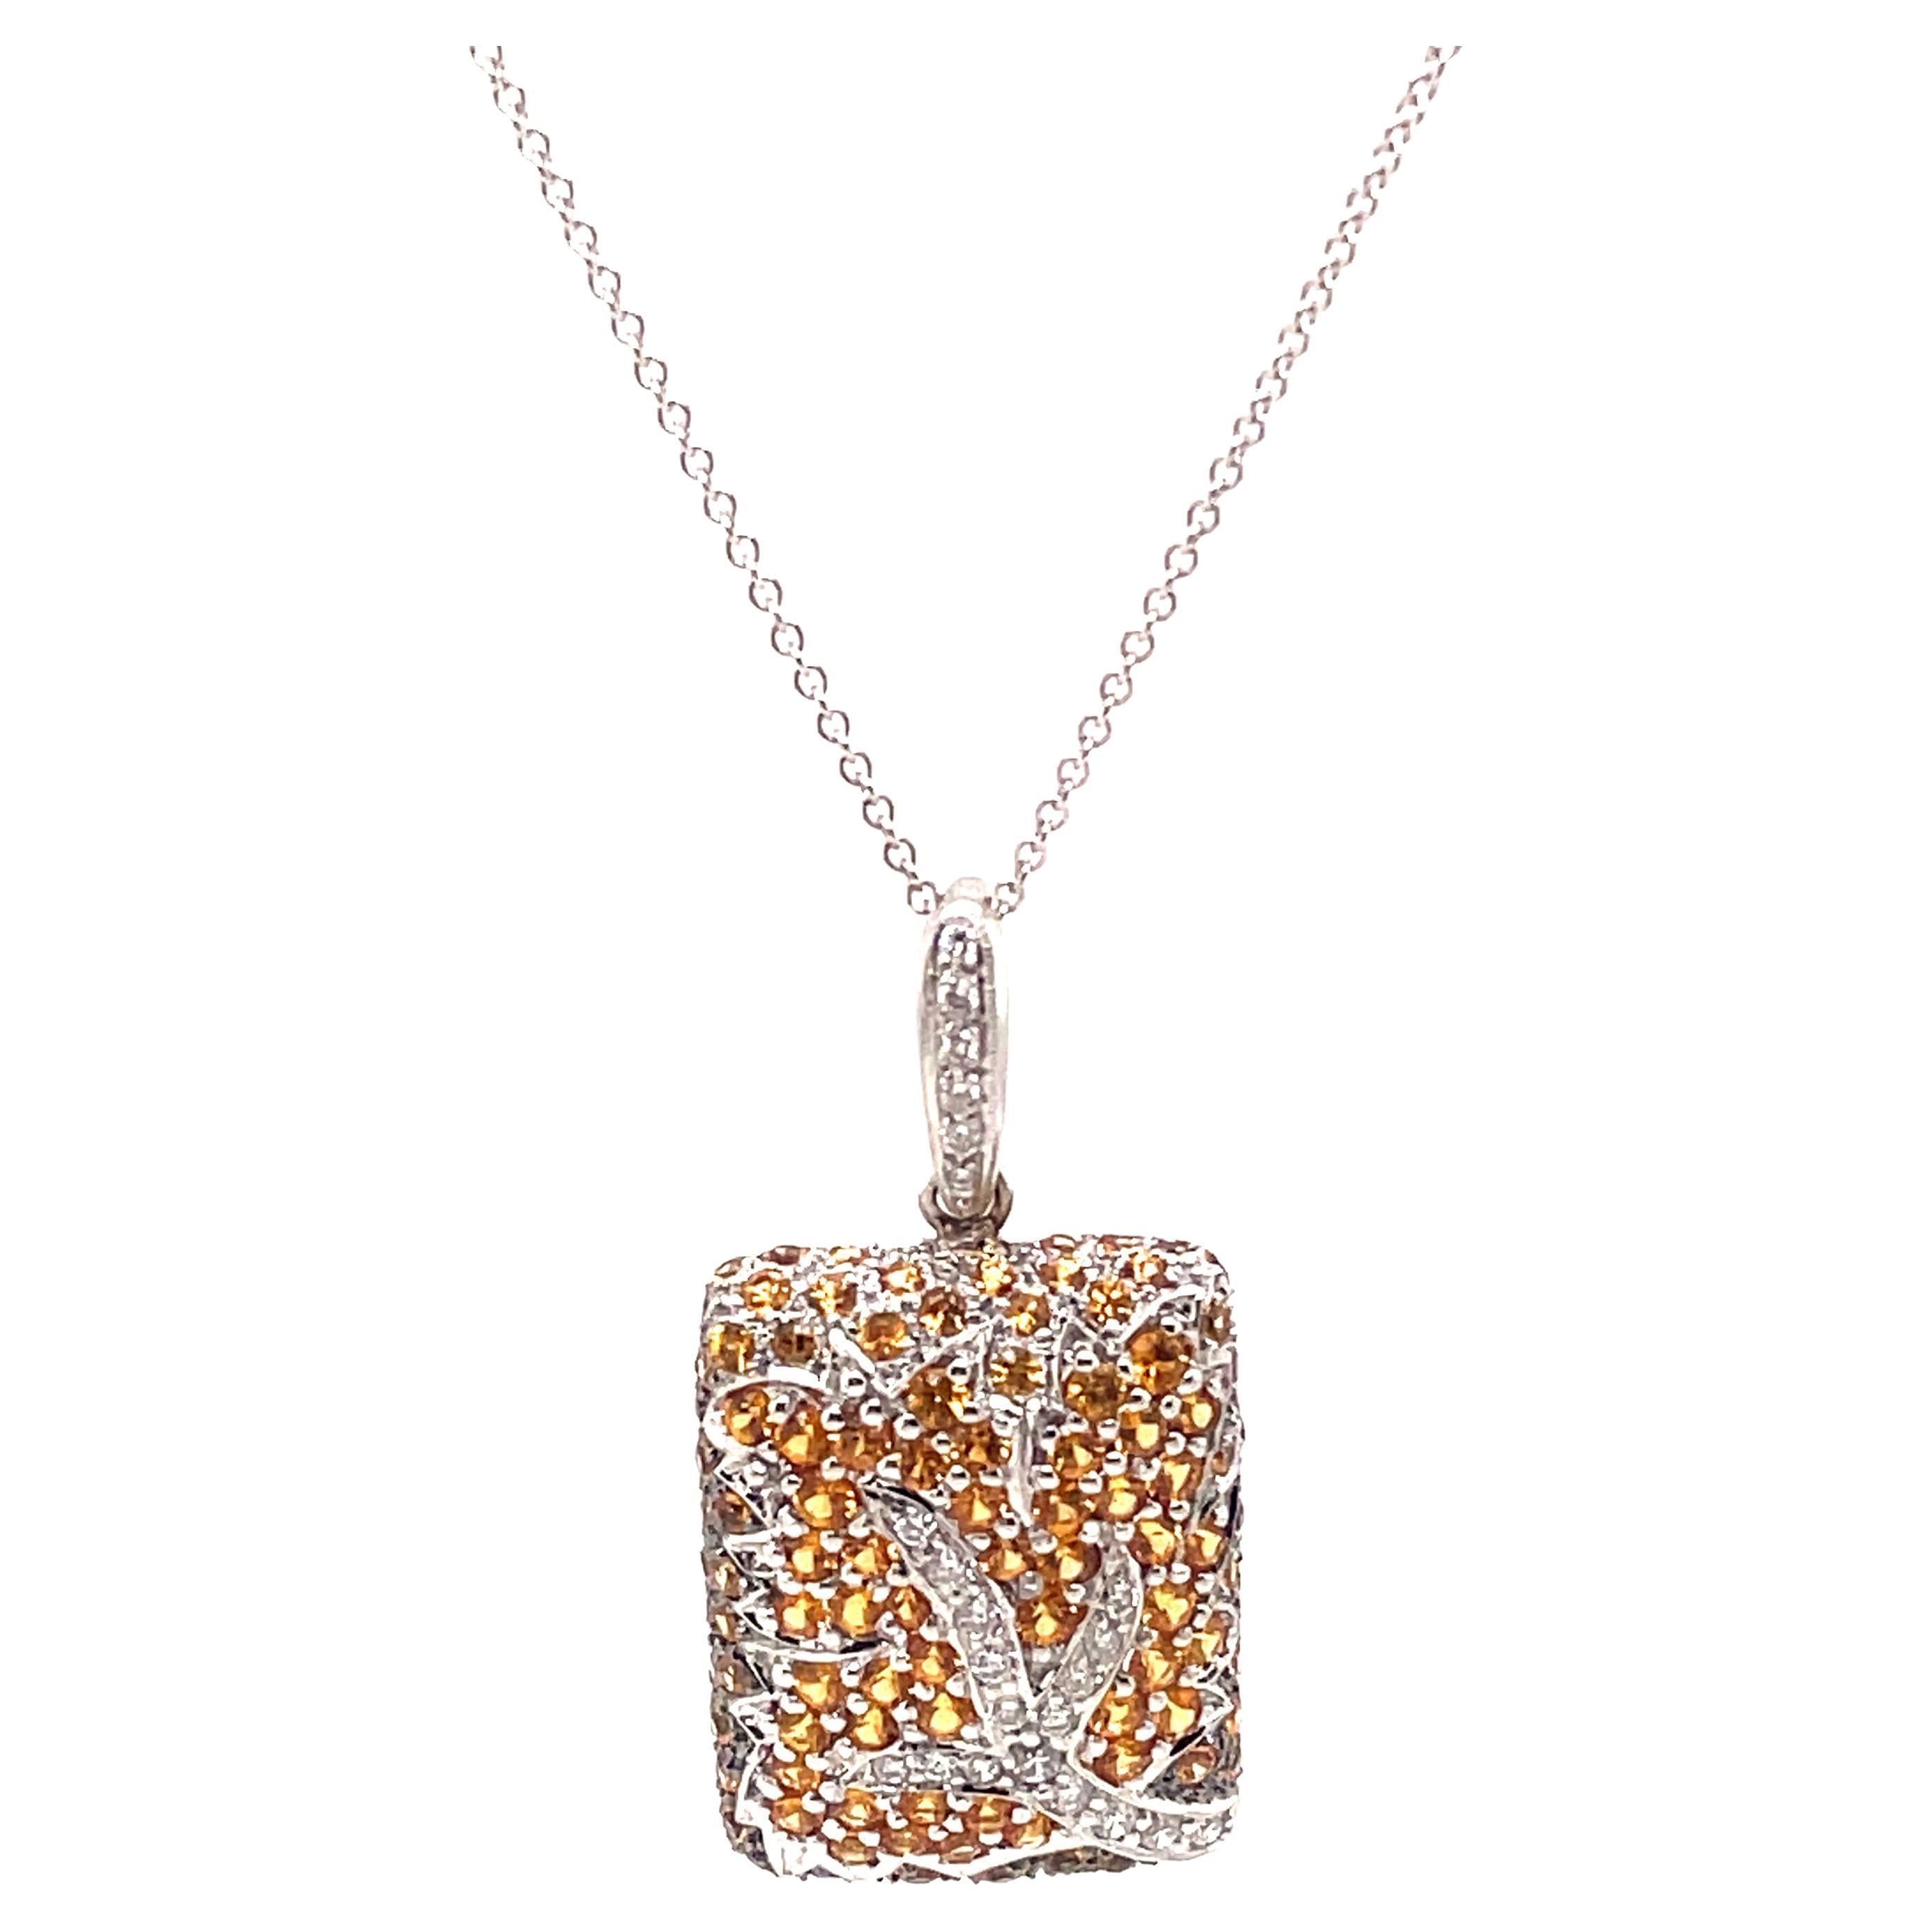 5.28 Yellow Sapphire with Diamond Tree Inspired Pendant Necklace 18k White Gold For Sale